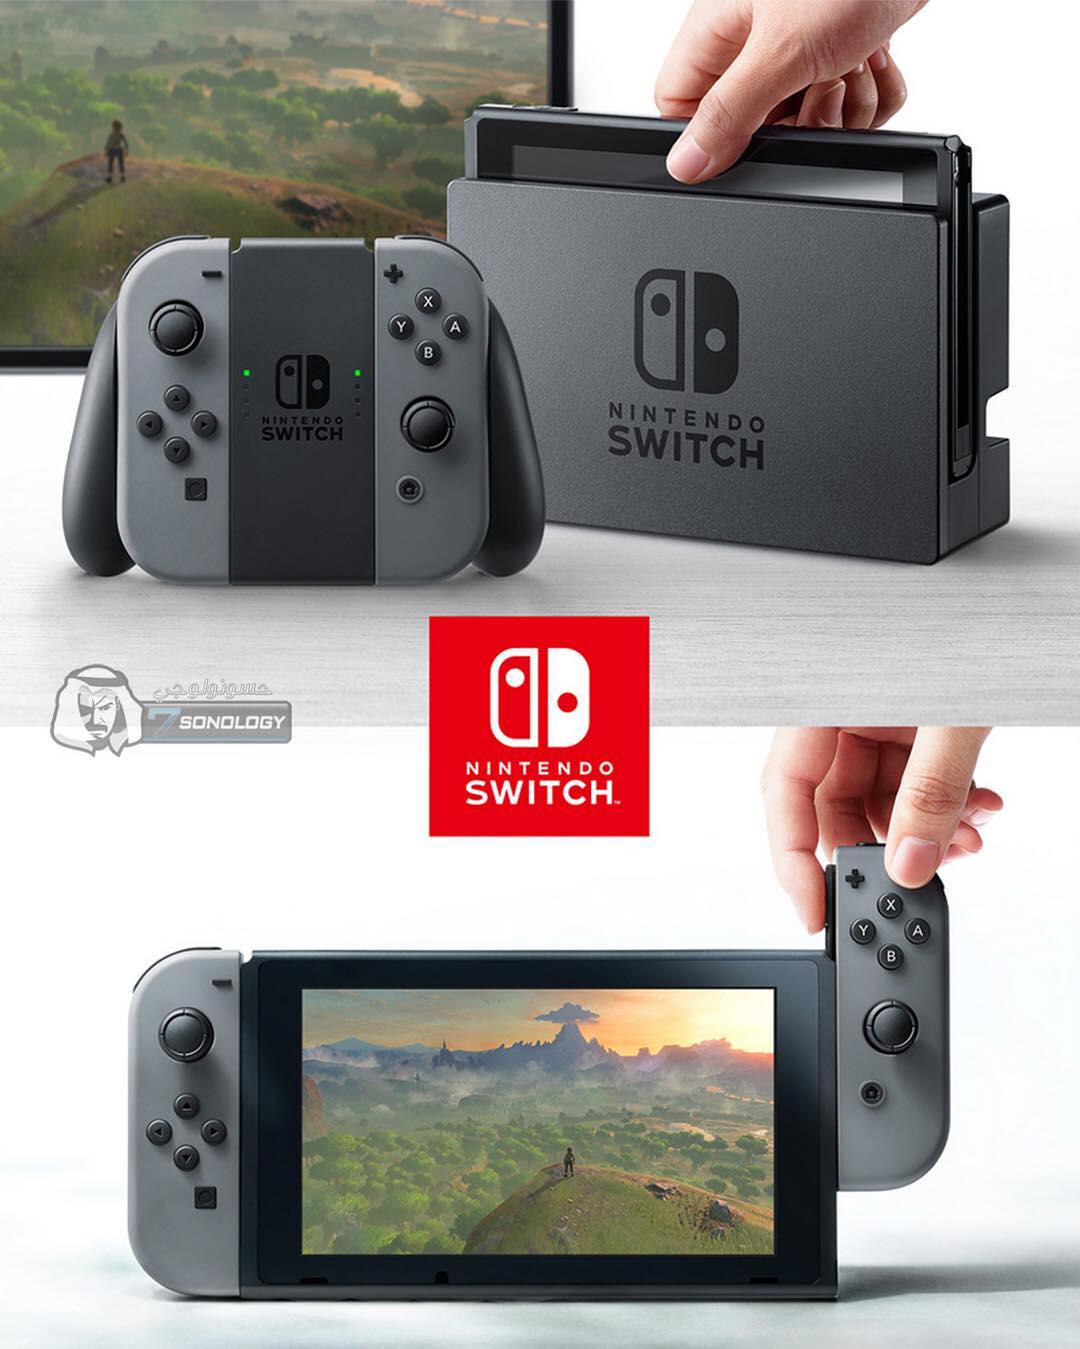 aramajapan_nintendo-switches-it-up-with-new-console